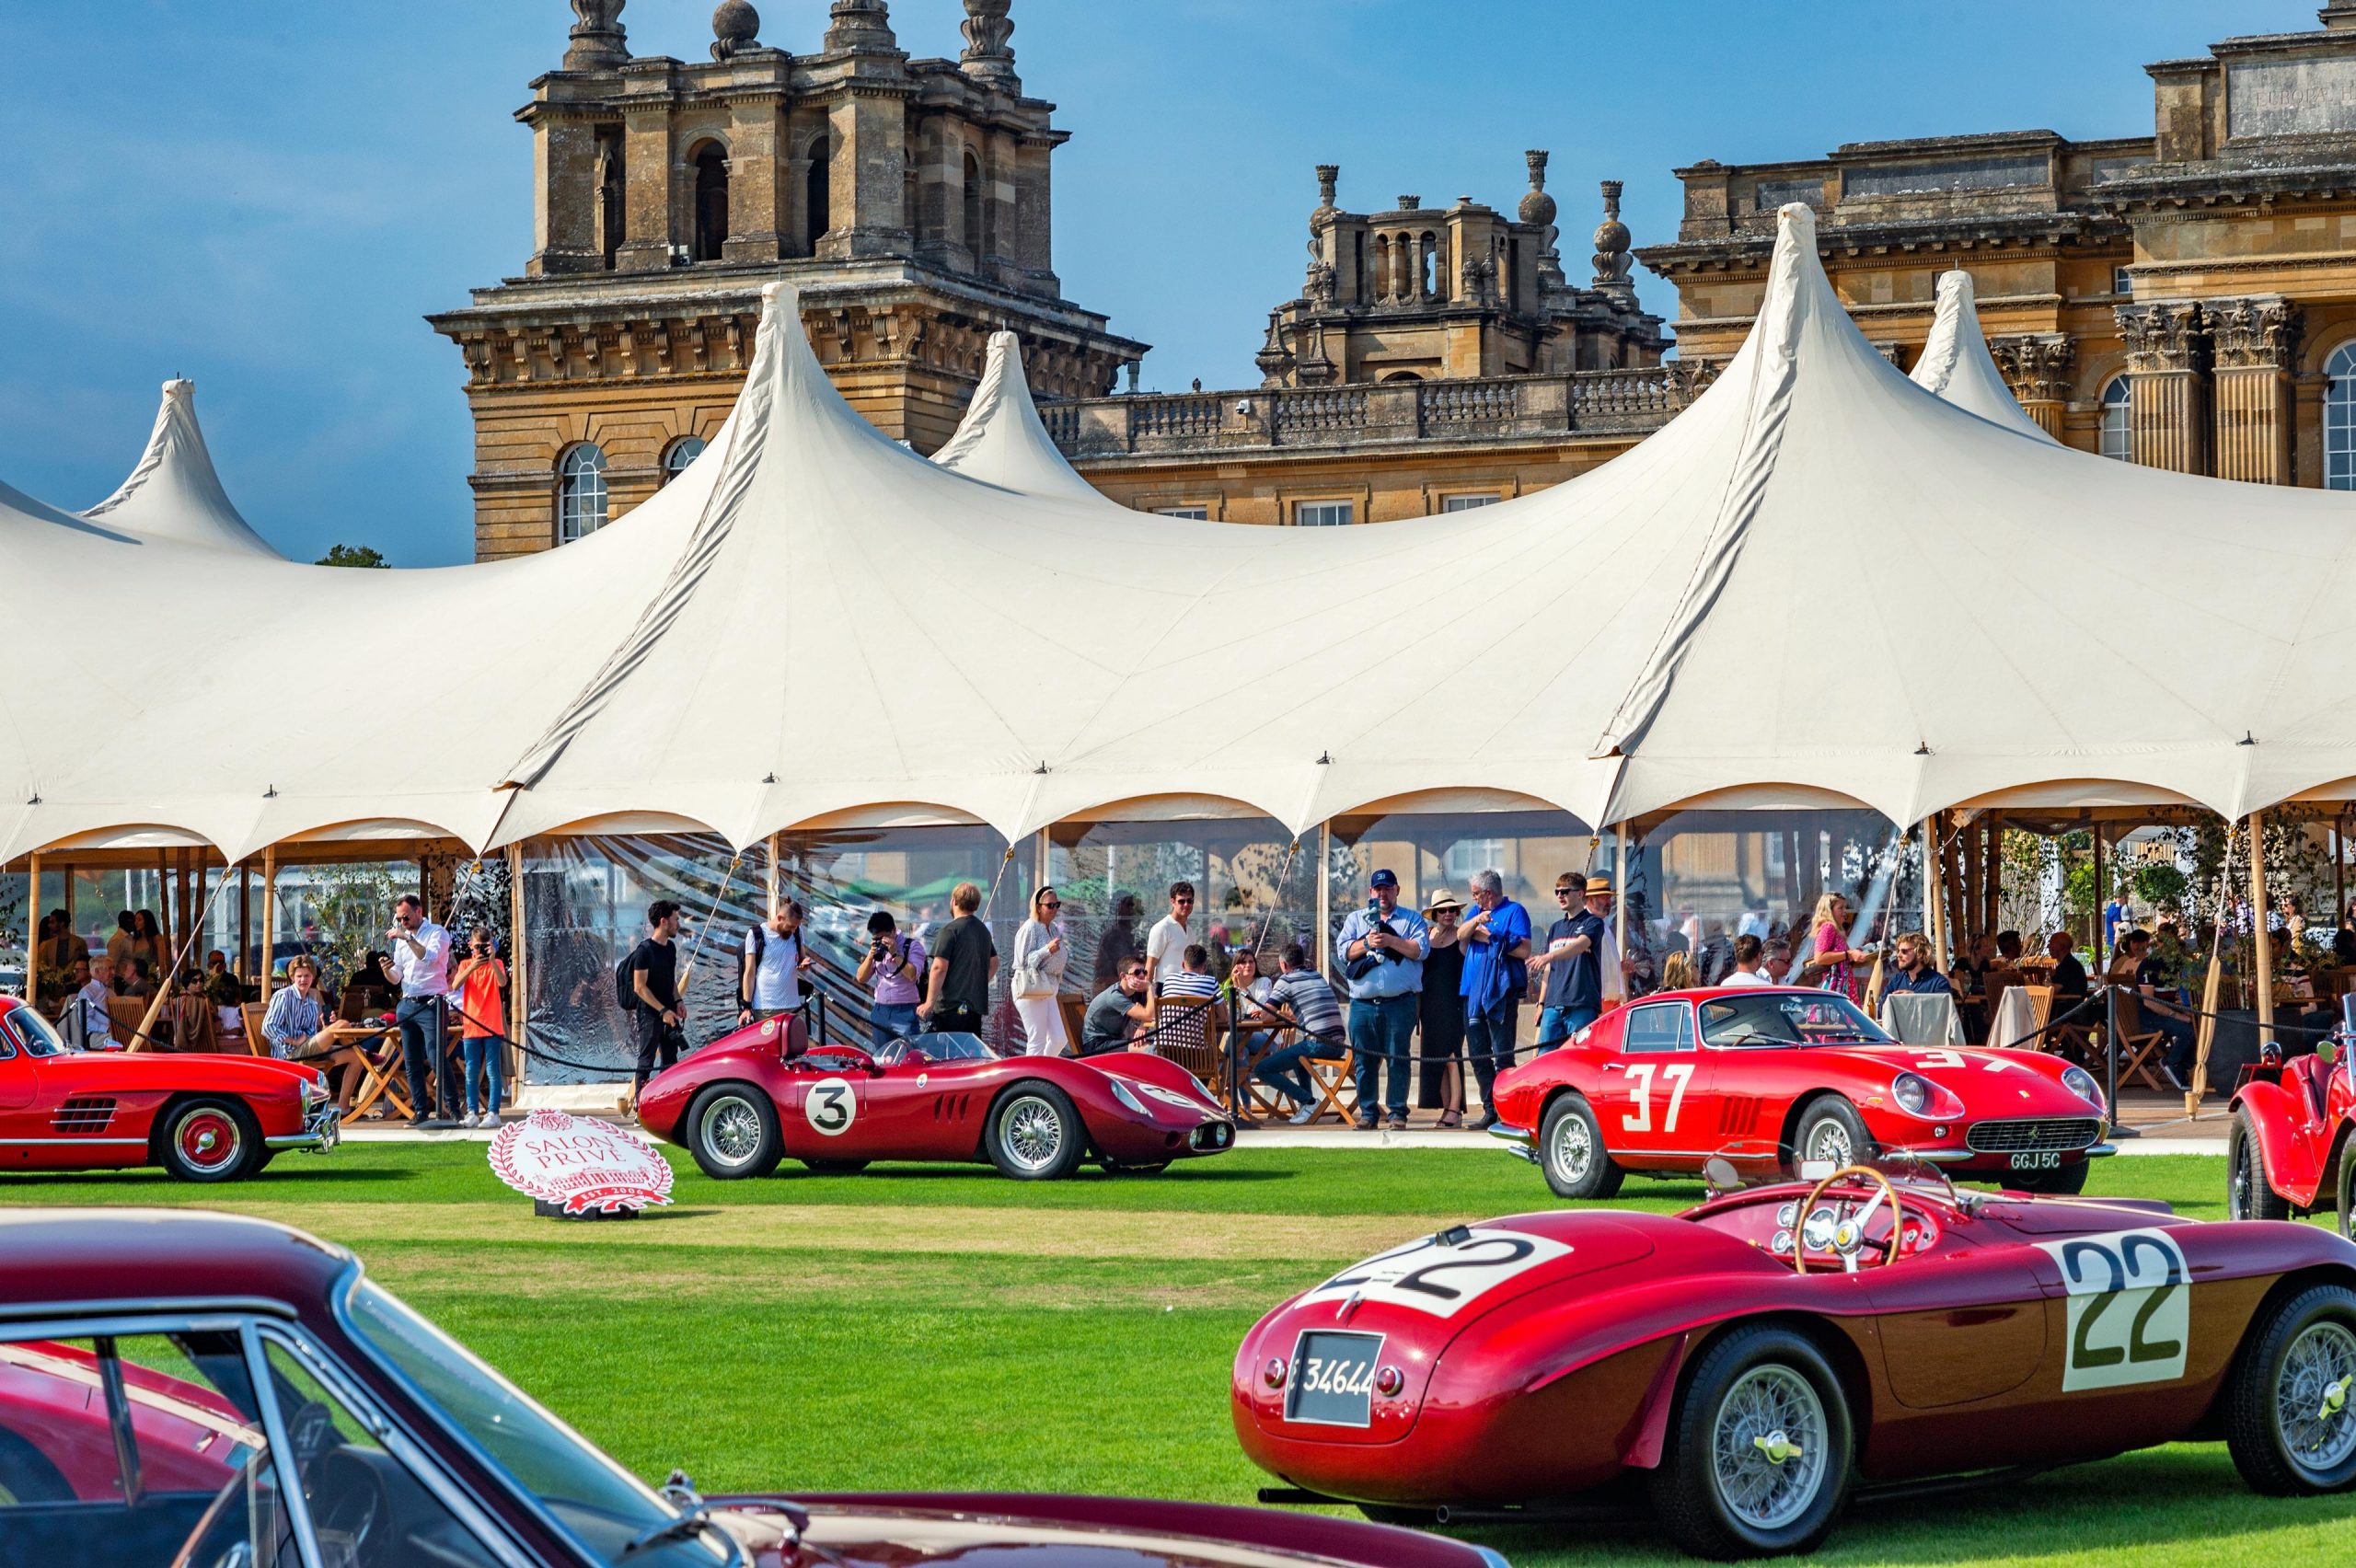 A shot of a car show event in London, featuring people enjoying the show with red classic Ferraris in the foreground and a large Manor House in the background.